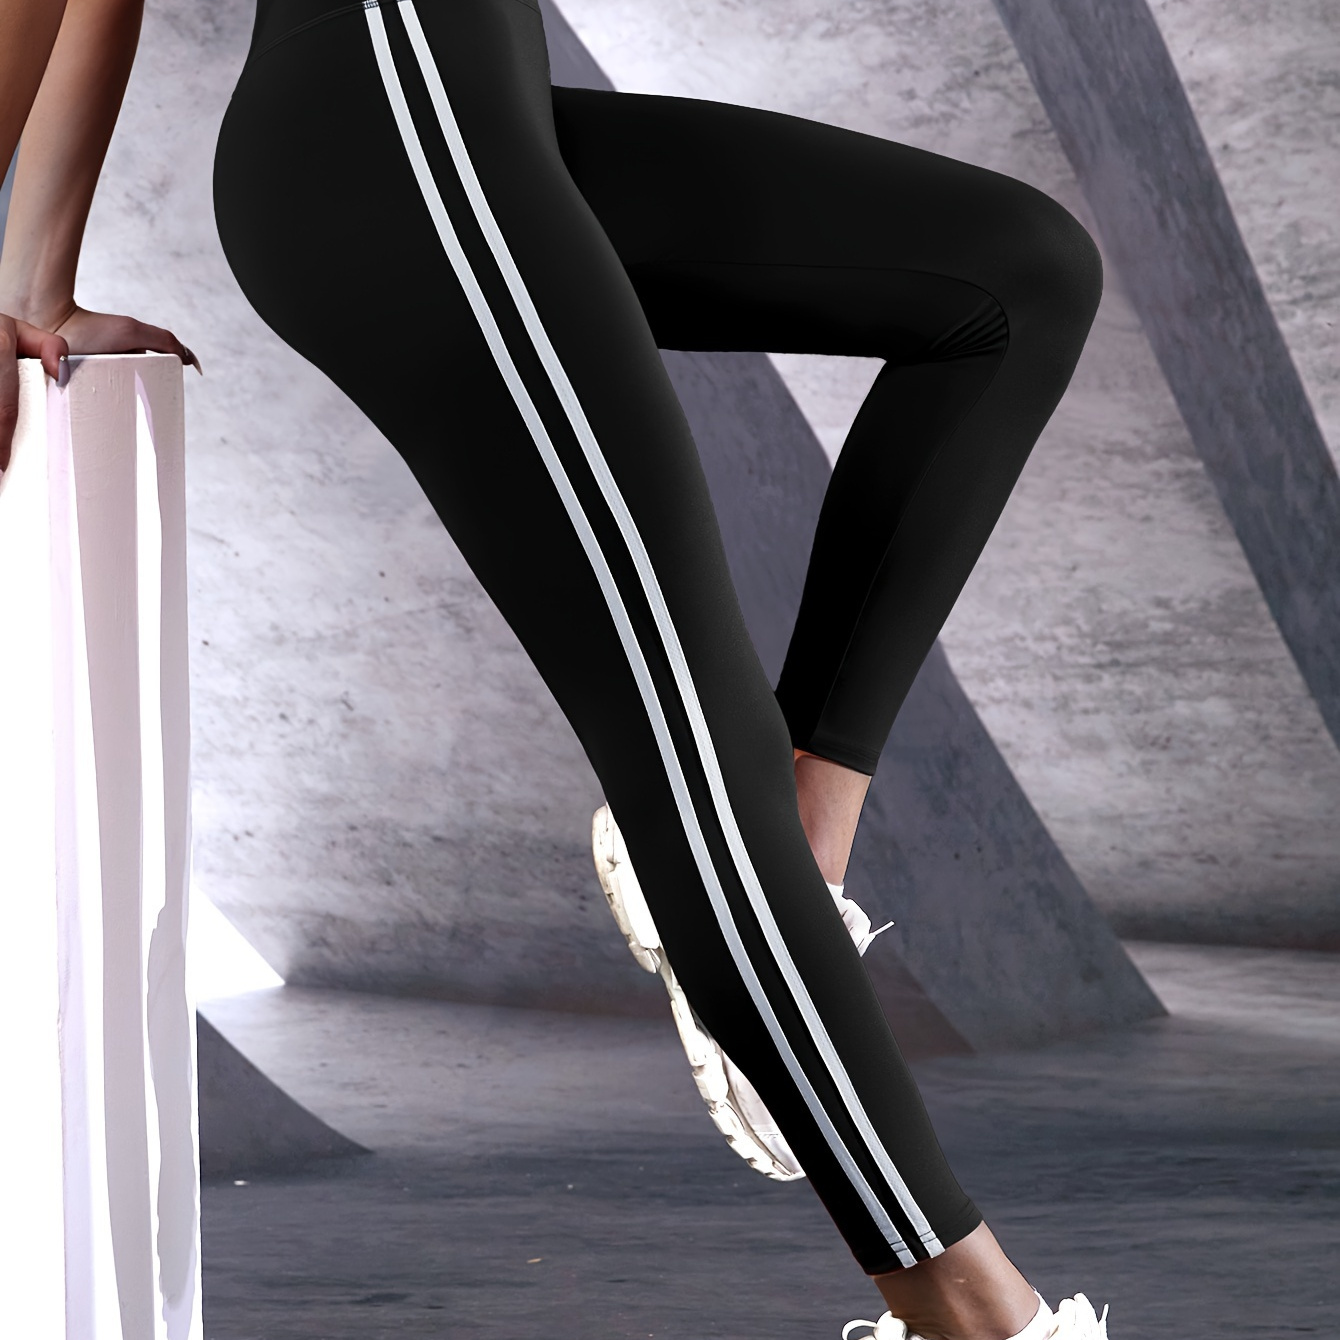 

Women's High Waist Yoga Pants With Side White Stripes, Stretchy Sports Cycling Tights, Comfortable Activewear Leggings - For Fall & Winter